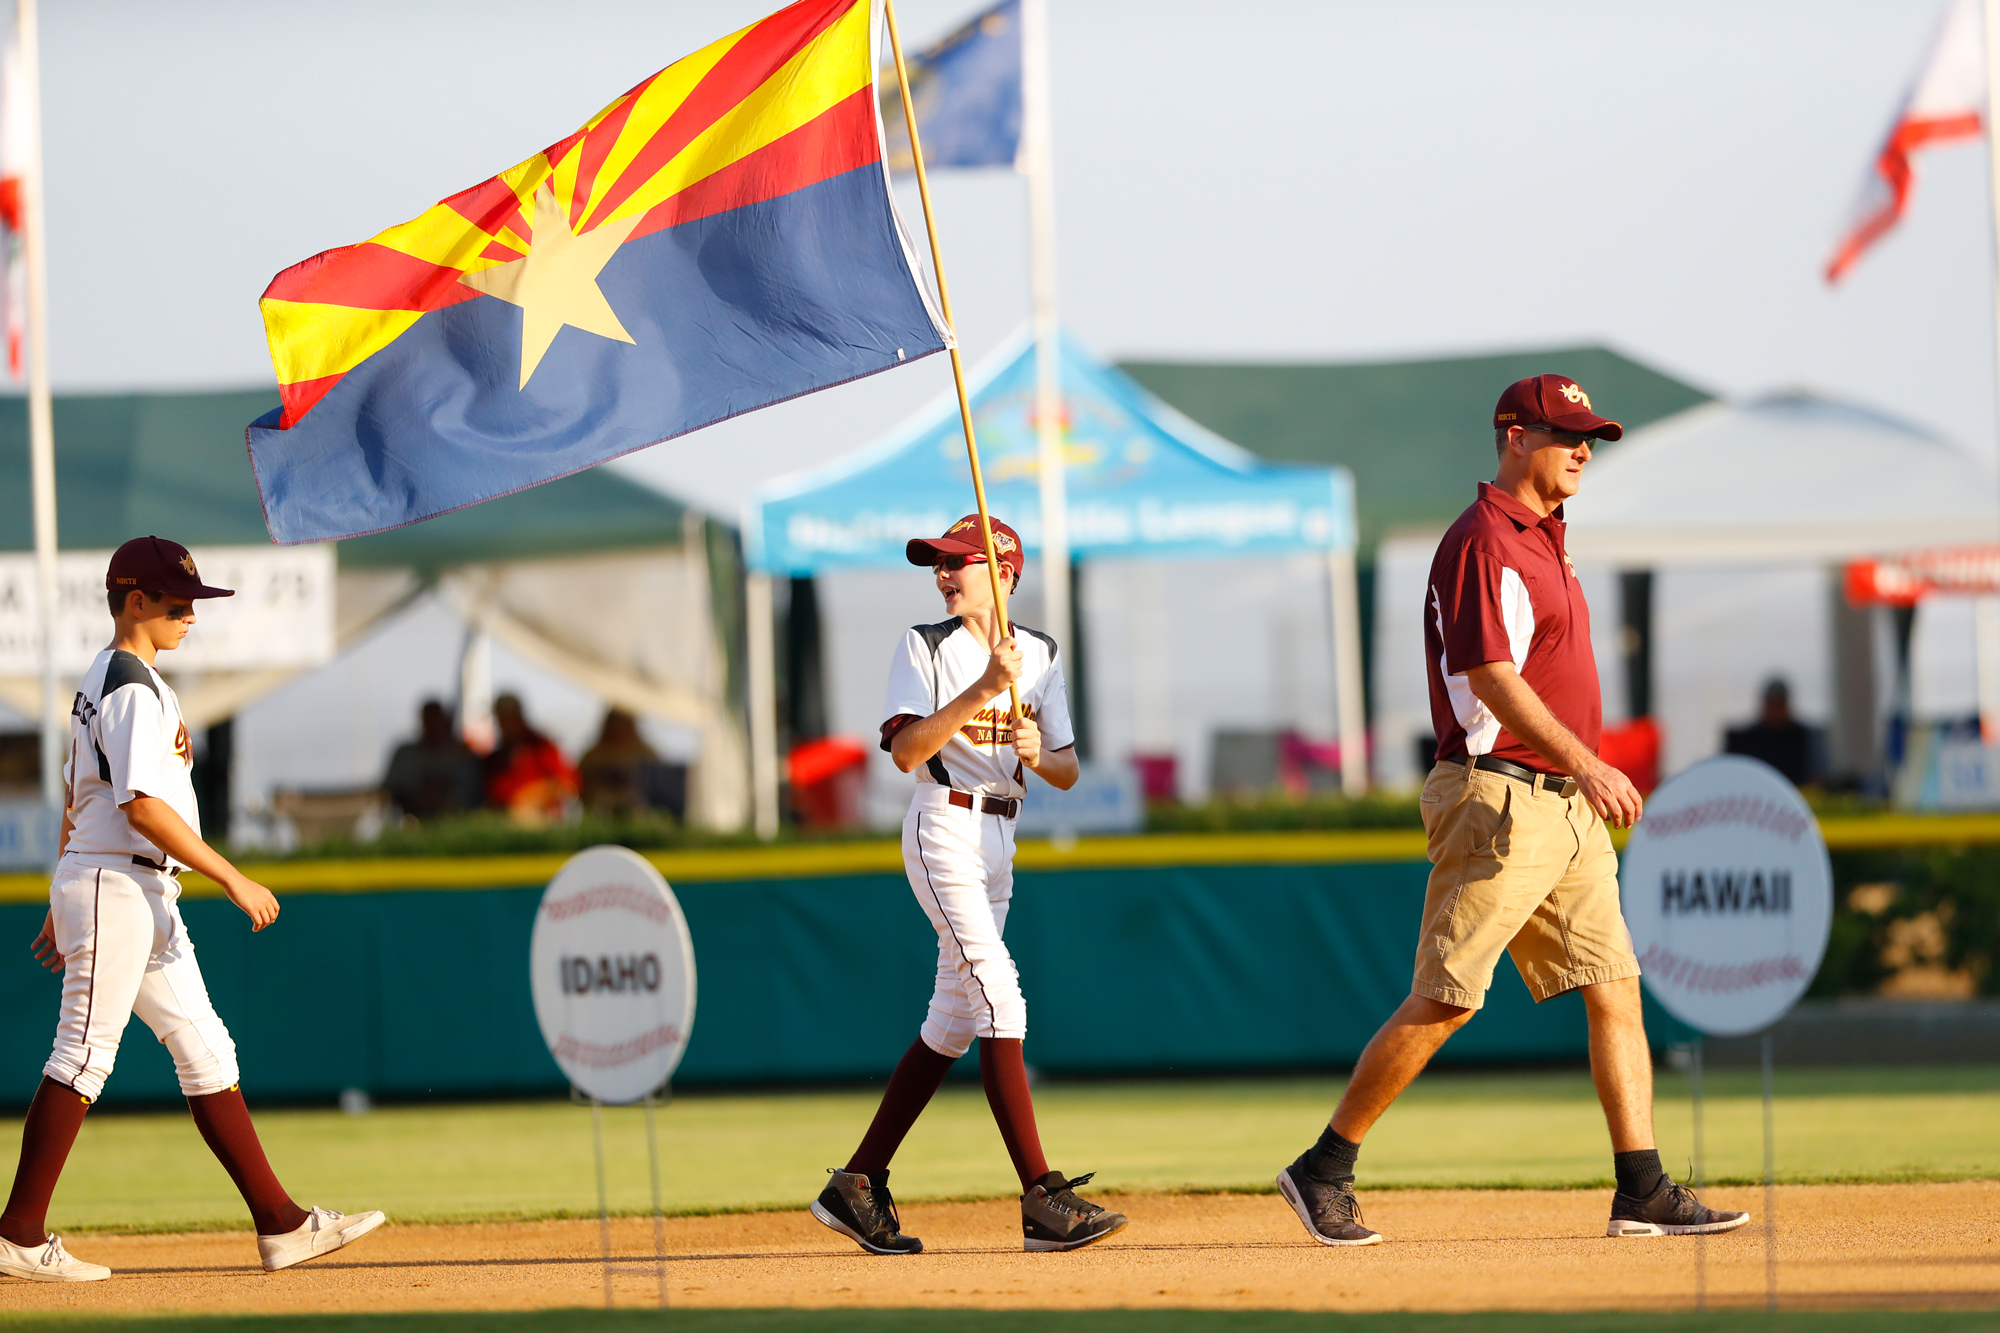 west-region-opening-ceremonies-players-holding-flag